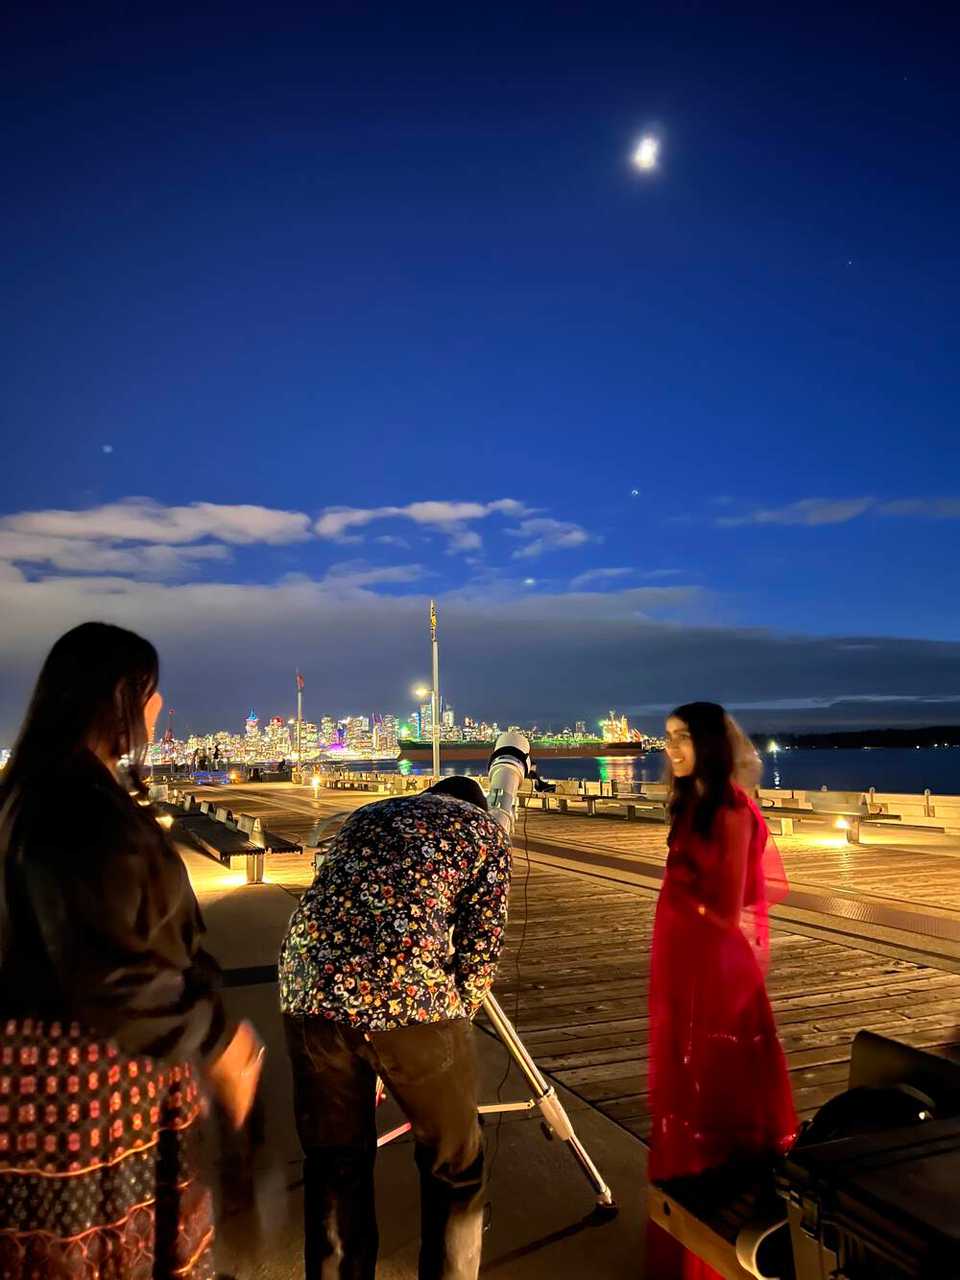 people viewing the moon